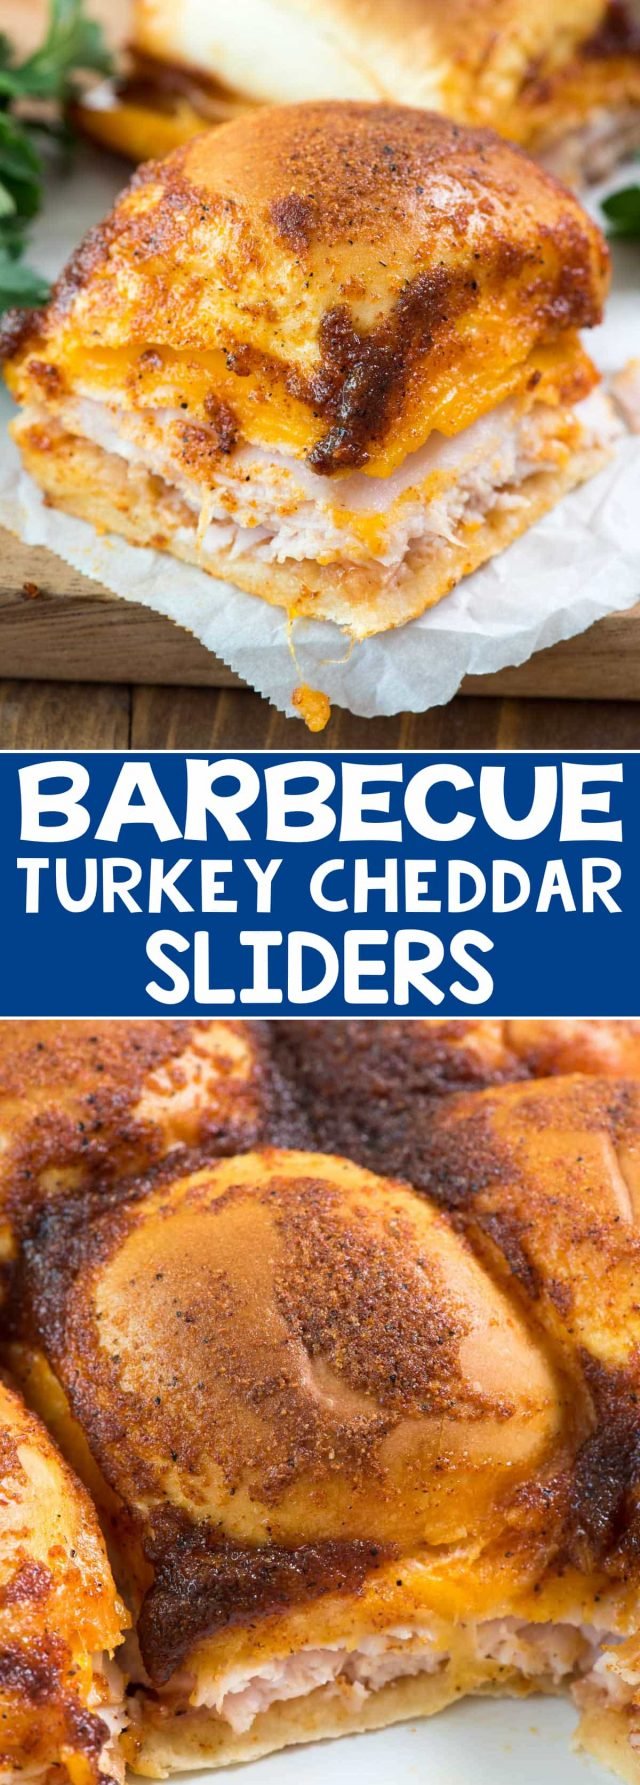 BBQ Turkey Cheddar Sliders - this easy slider recipe is full of turkey, cheese, and barbecue flavoring! The topping tastes JUST like a BBQ chip!